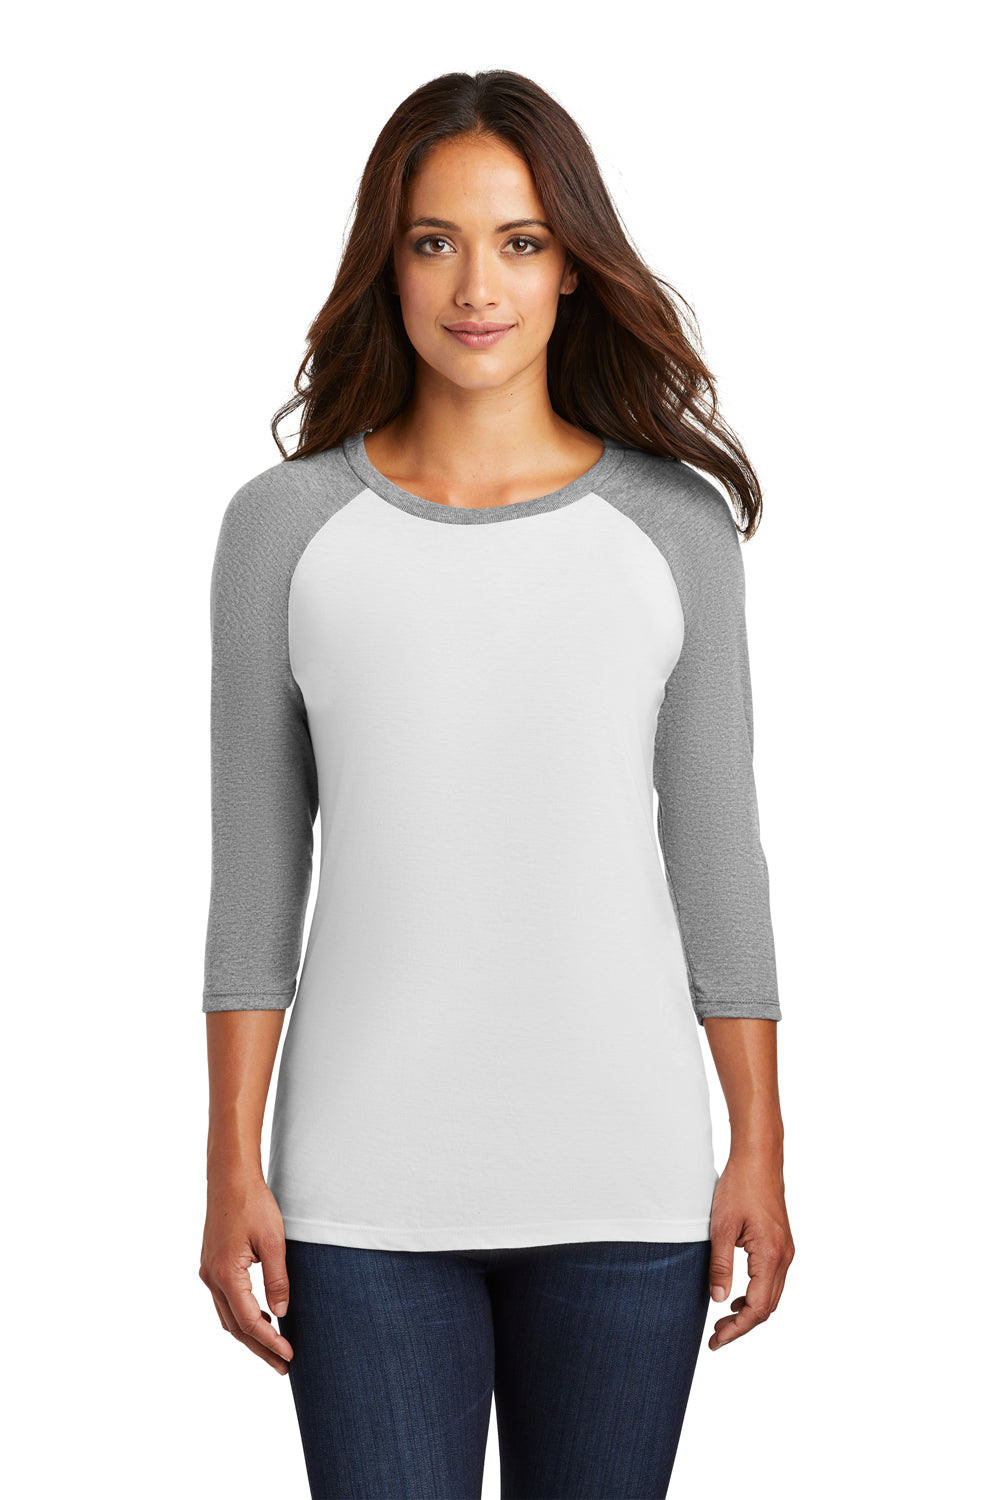 District DM136L Womens Perfect Tri 3/4 Sleeve Crewneck T-Shirt White/Grey Frost Front